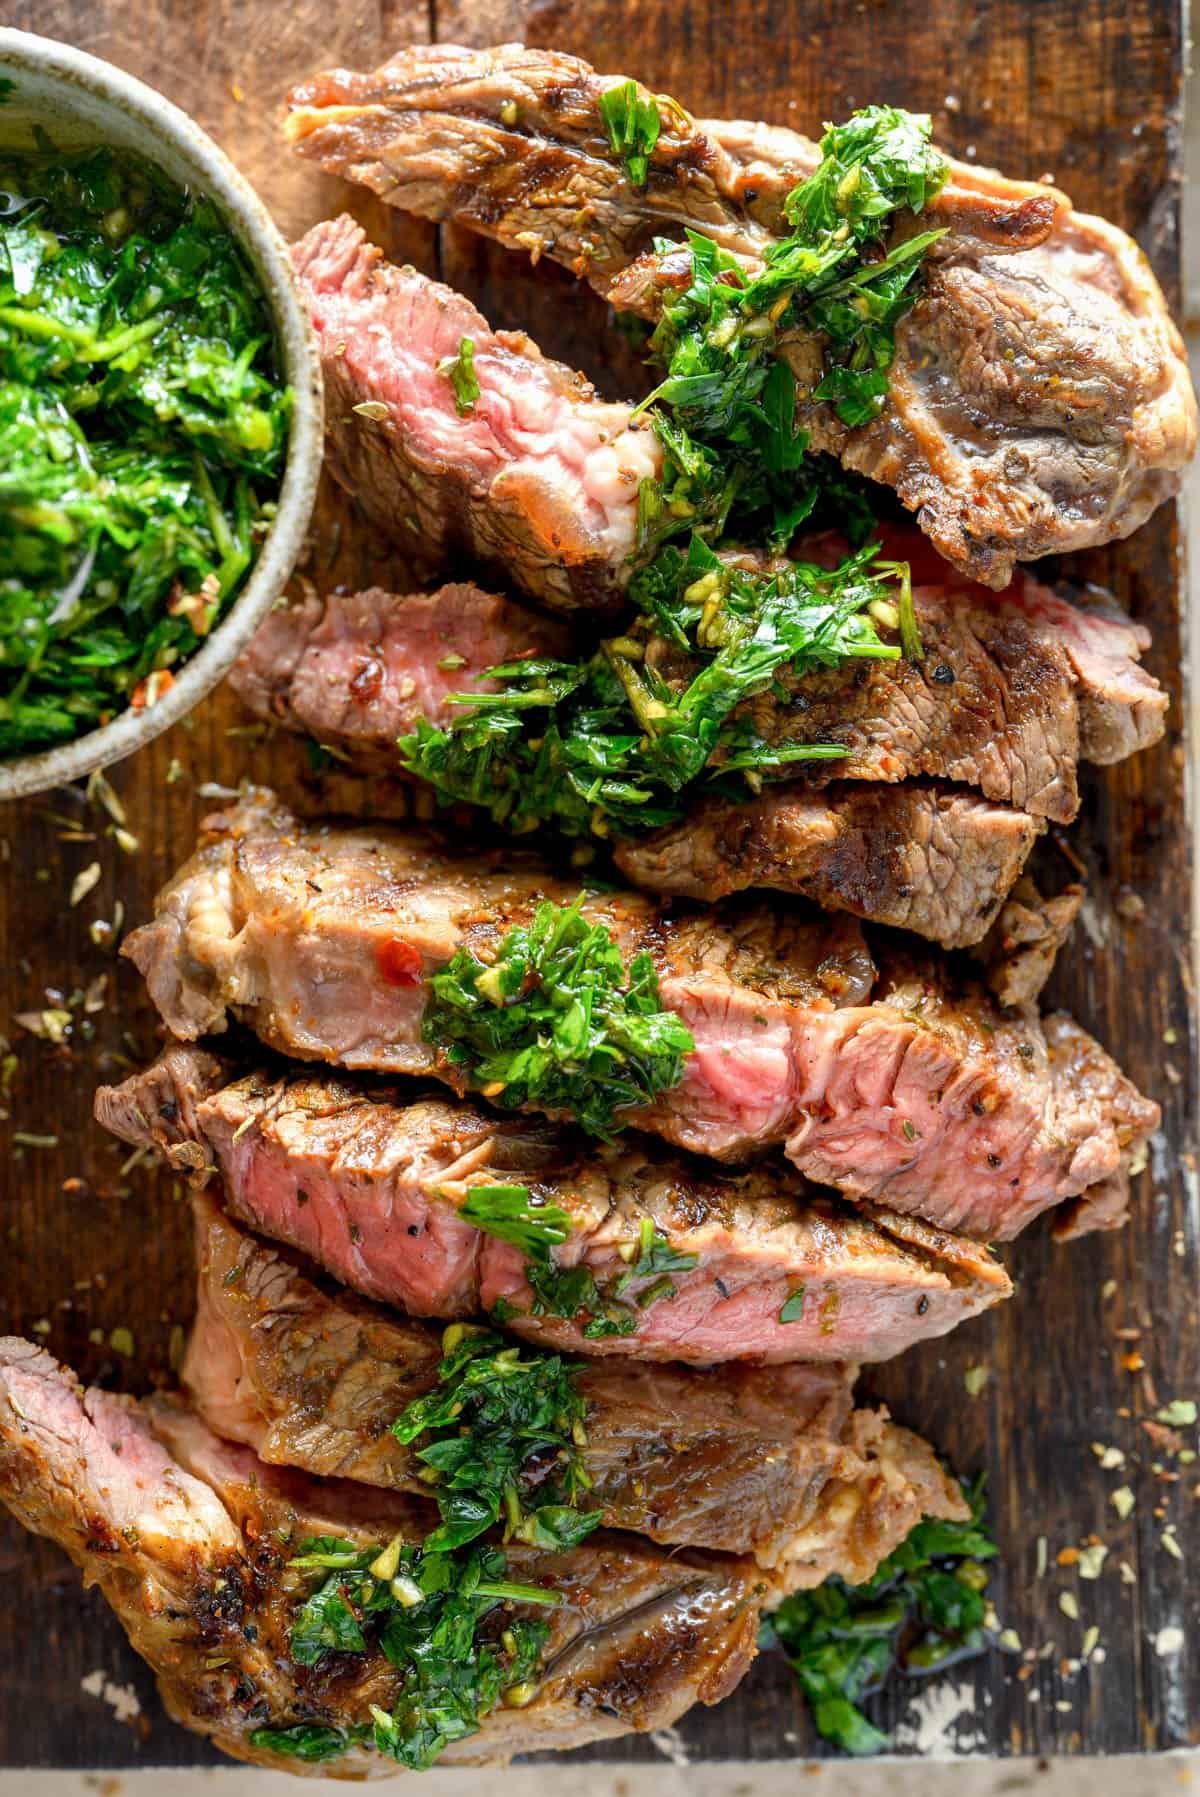 A sliced medium-rare steak with chimichurri sauce drizzled on top.